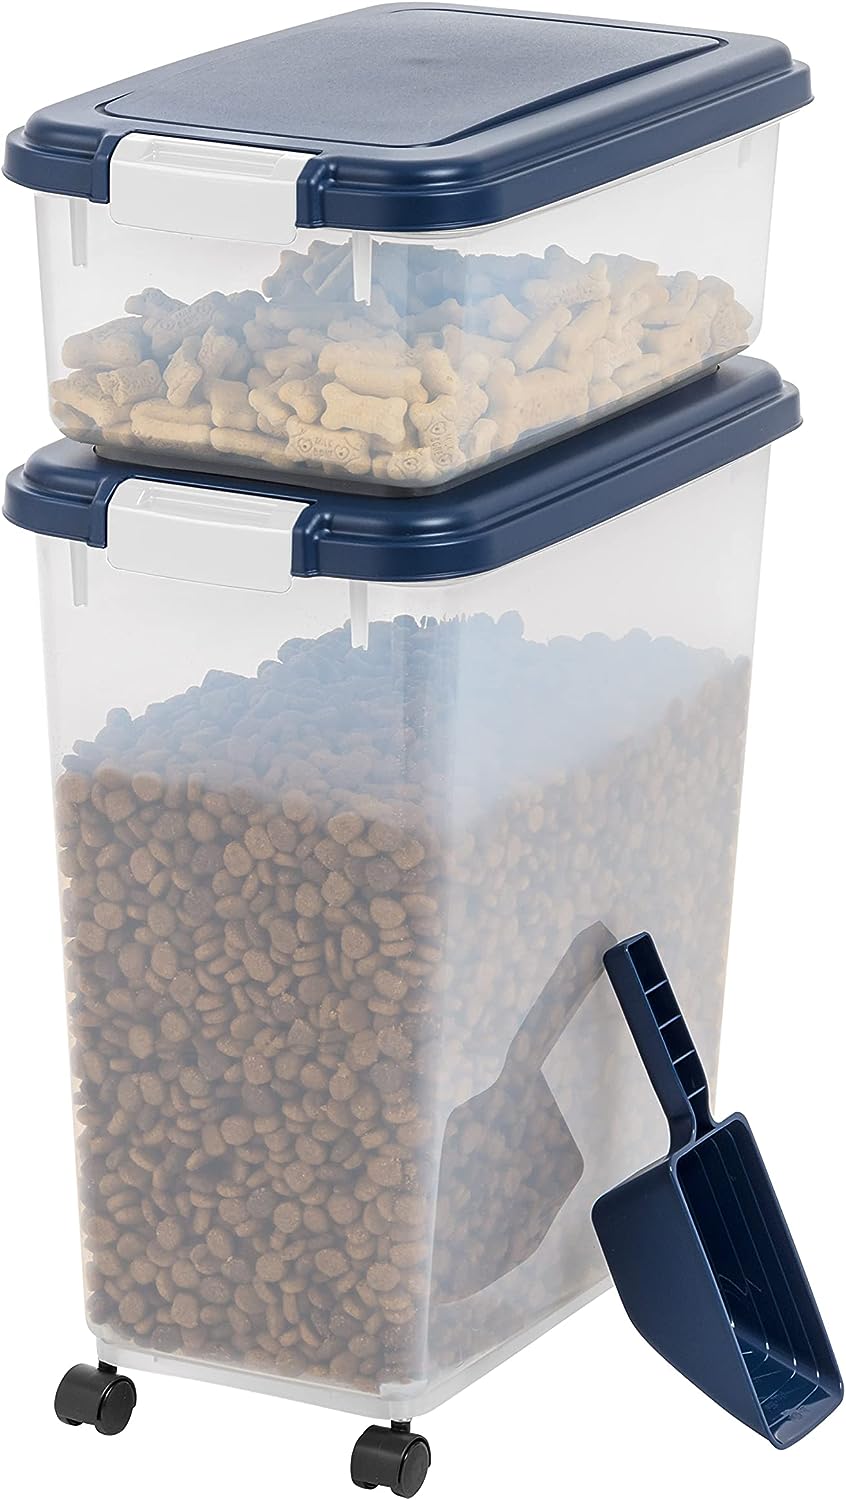 stacked set of dog food containers on wheels